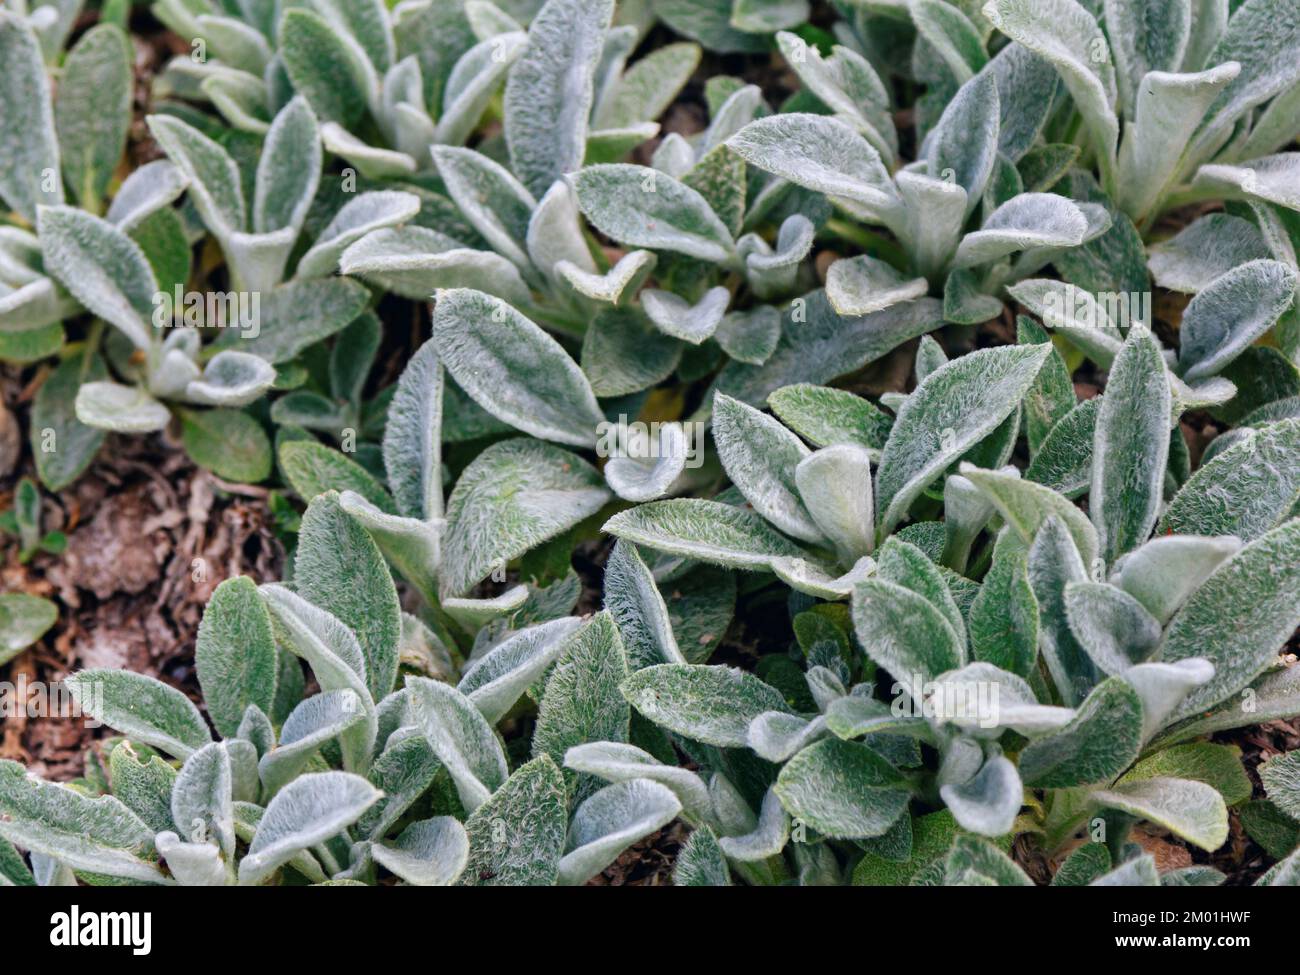 Close up Stachys byzantine or woolly hedgenettle  decorative flowering plant in the mint family Lamiaceae growing in the garden Stock Photo